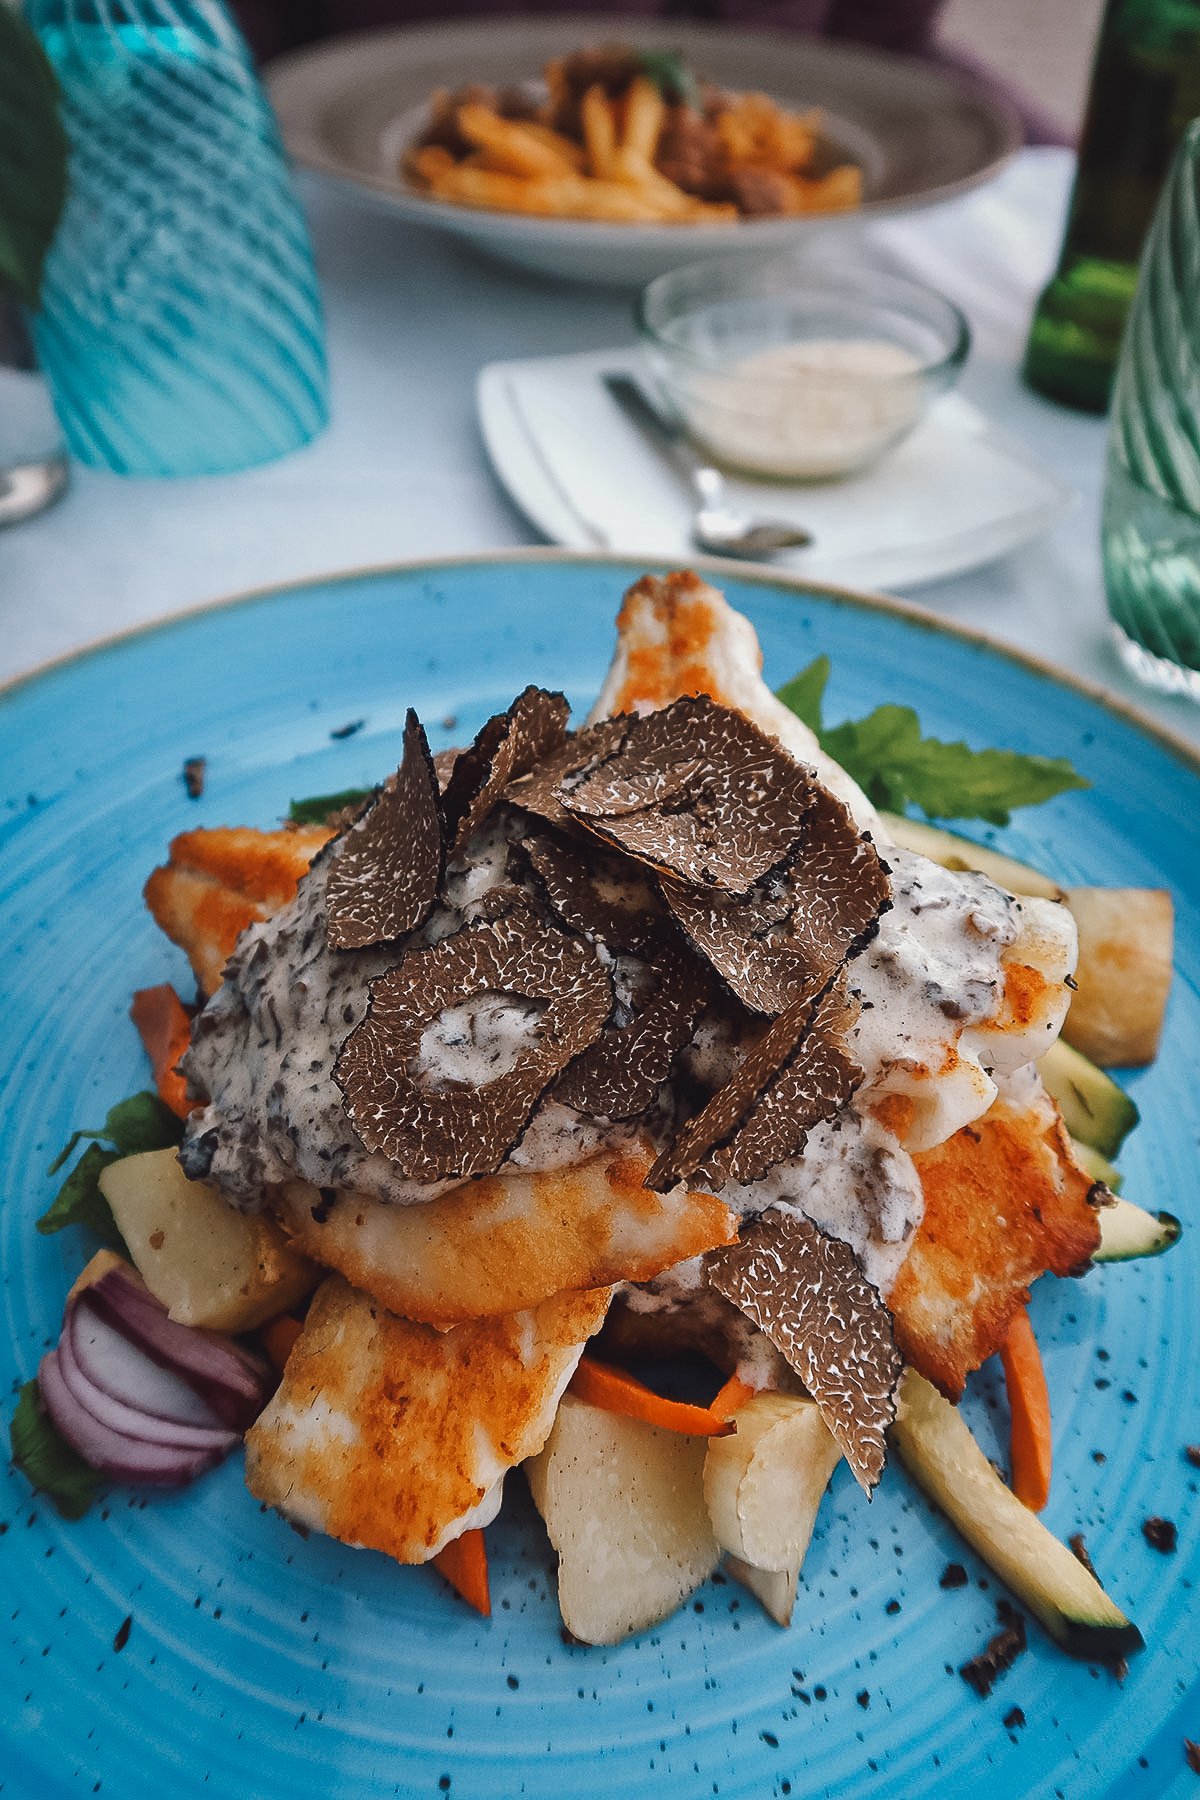 Fish with truffle dish at a restaurant in Rovinj